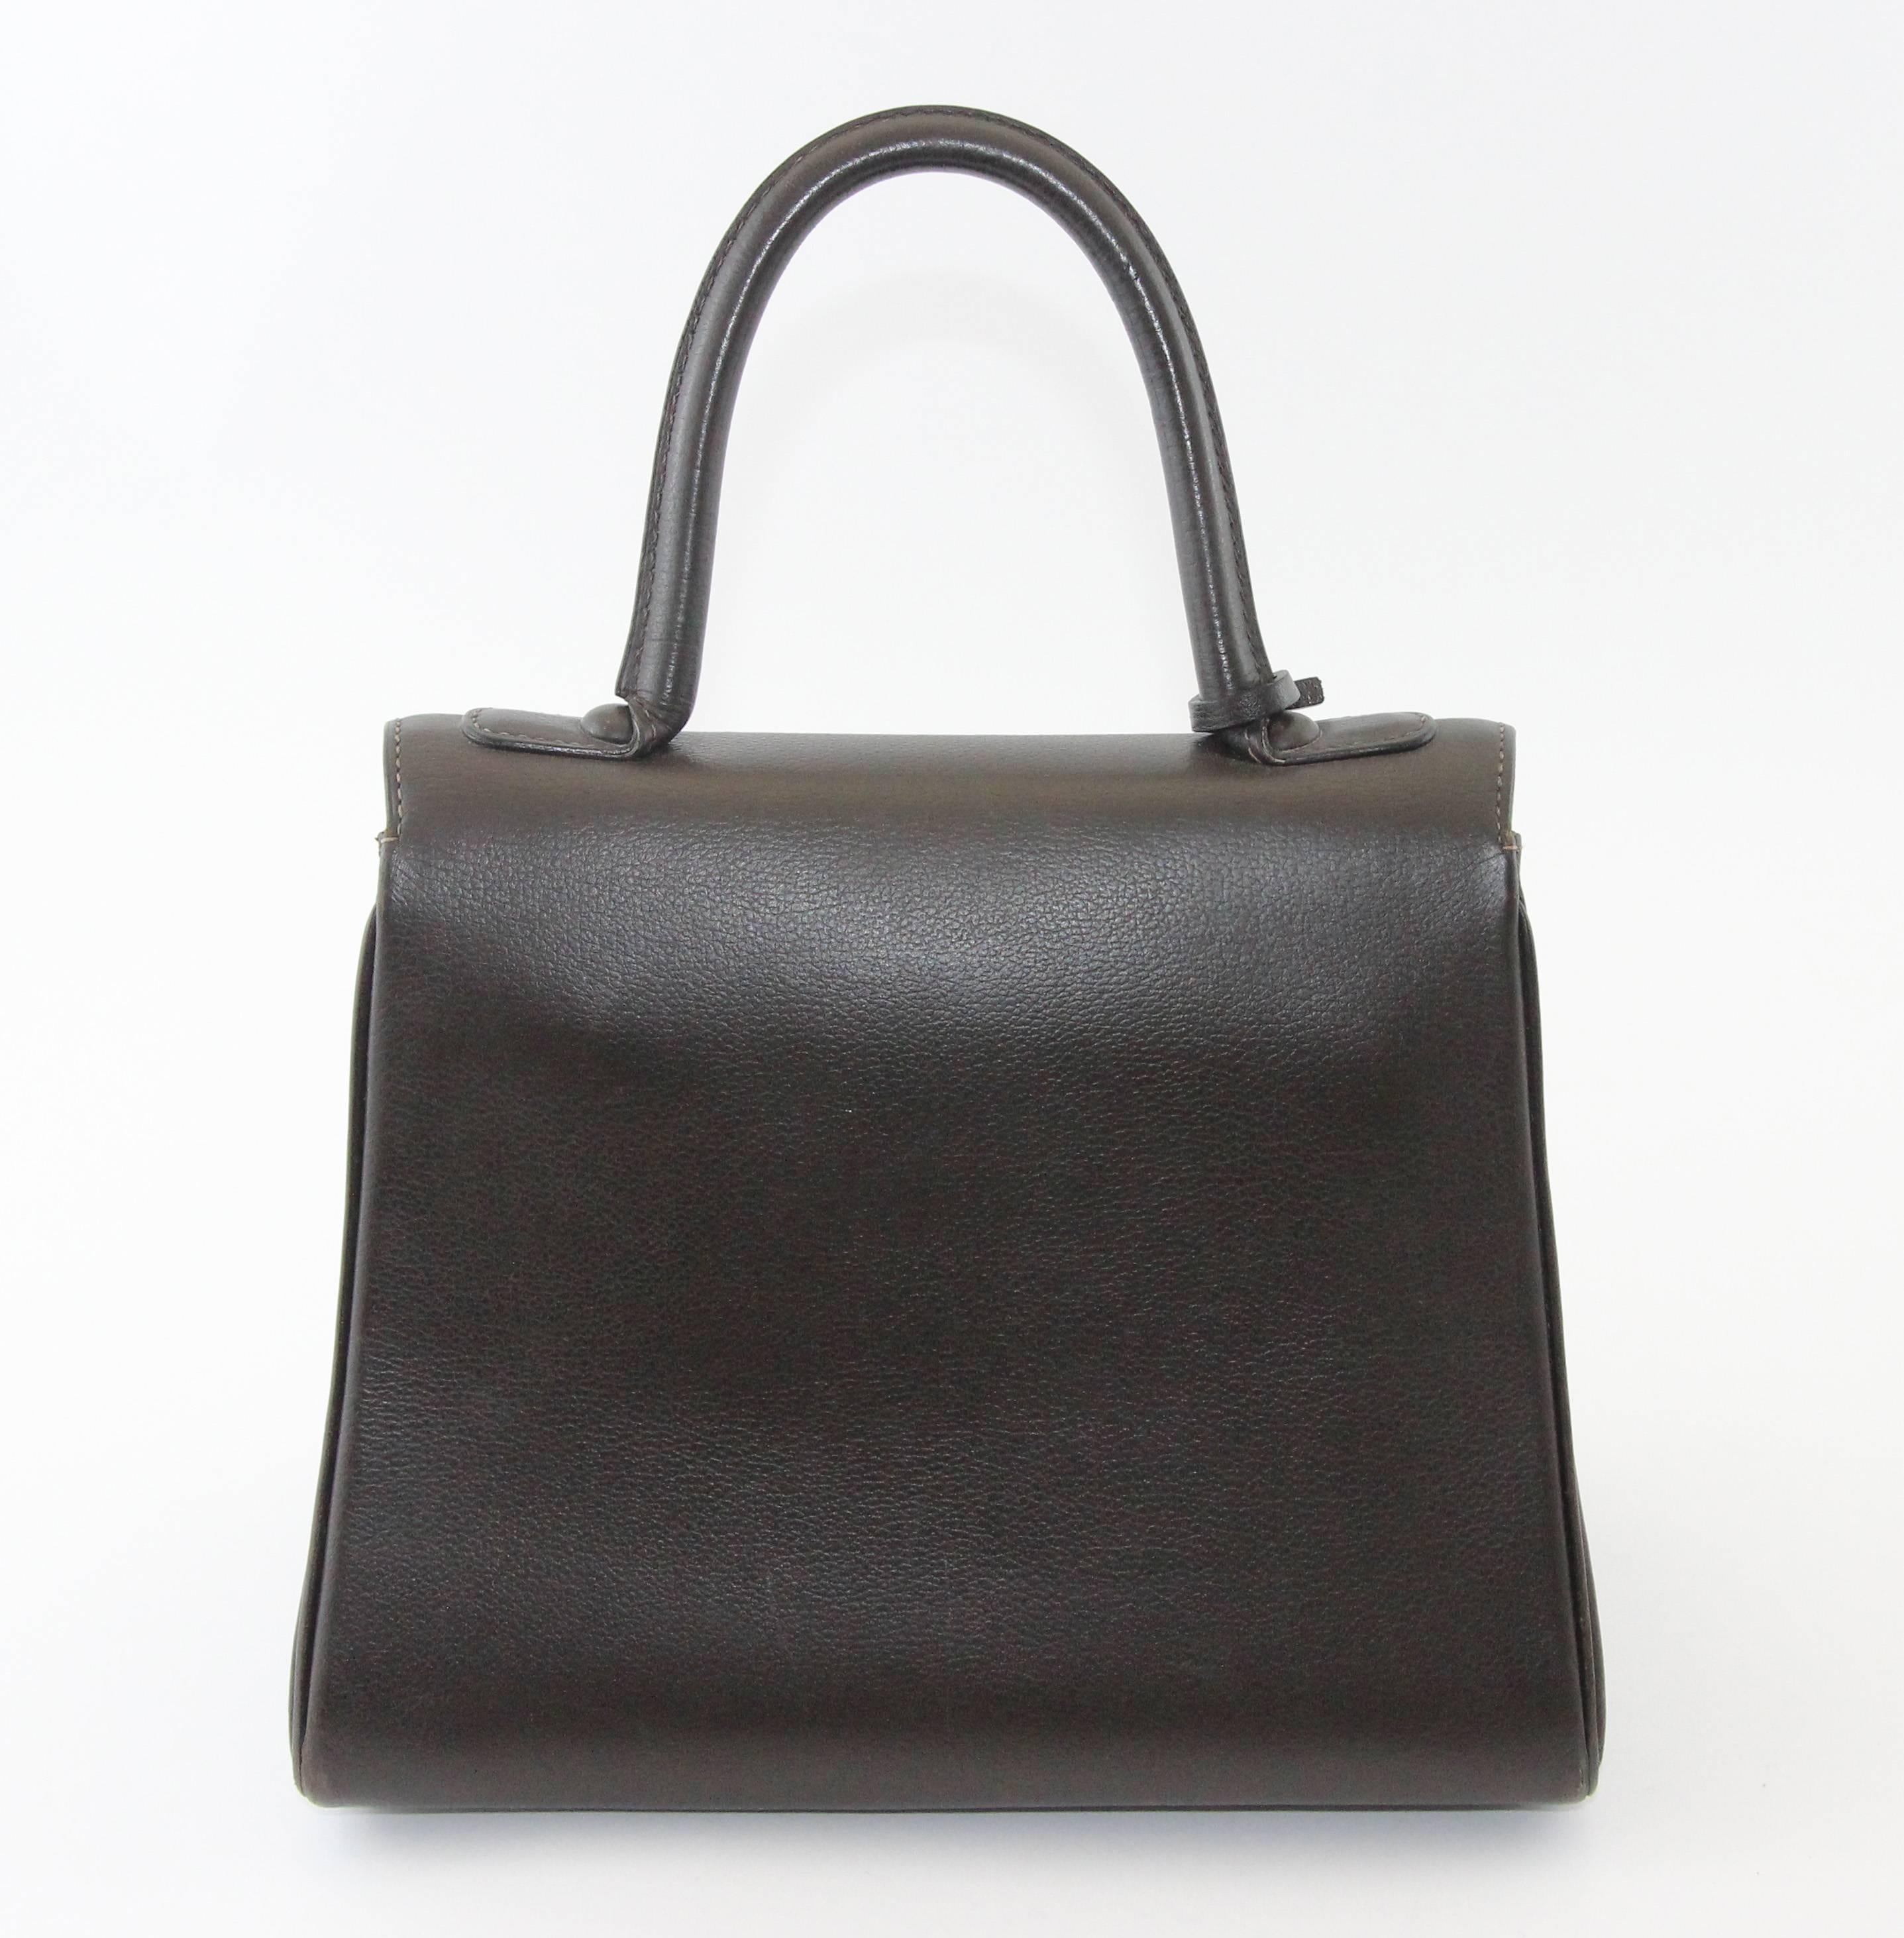 Brilliant small brown chocolate bag, silver hardware, circa 2008. 
Very good condition (some patina inside).  No shoulder strap.
Size: 23 x 30 x 12 cm. 